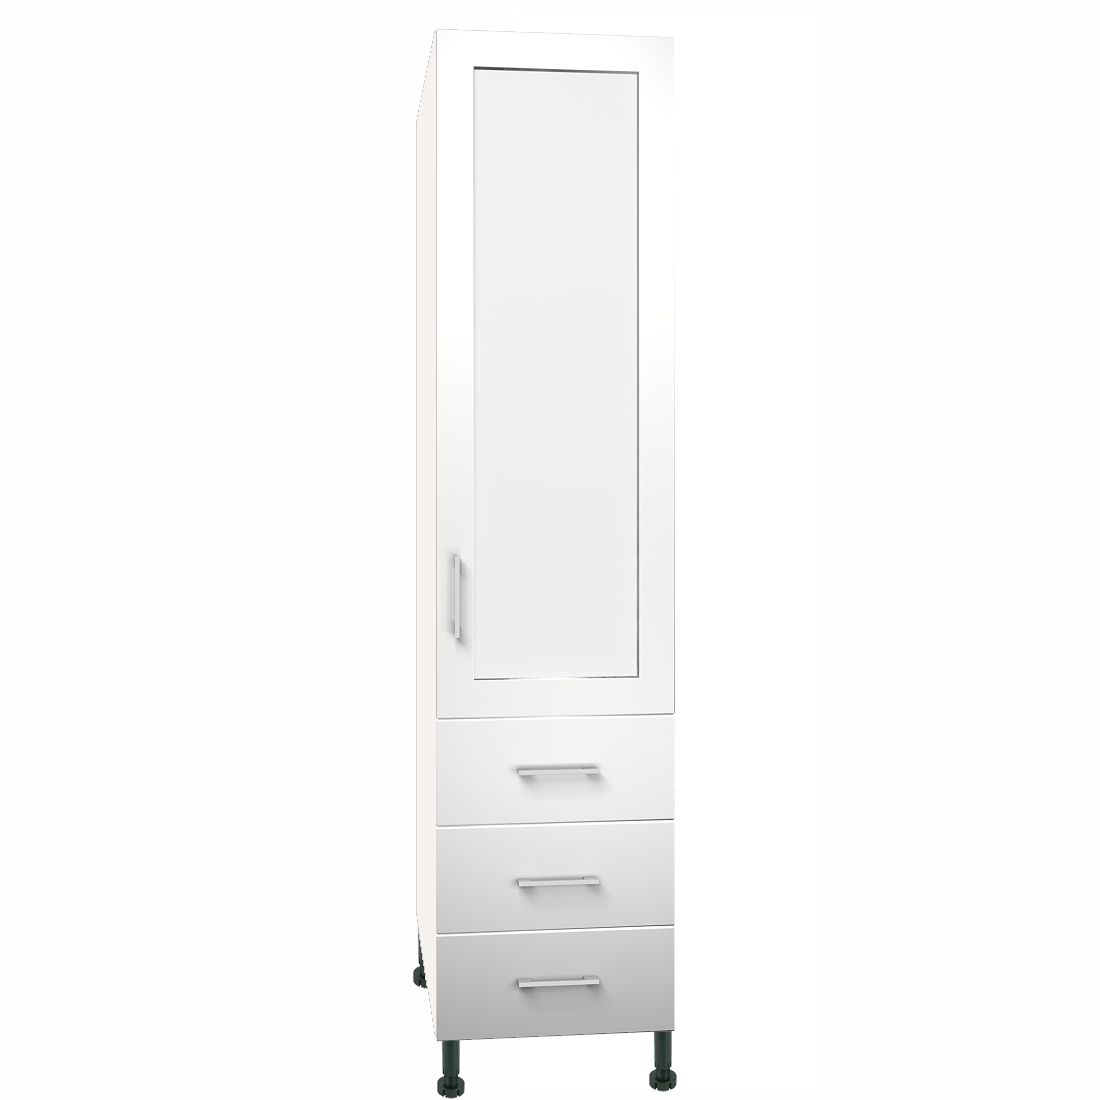 Single Wardrobe Mirrored Door 3 Drawers – Meon Acrylic – Paramount Bathrooms With Single White Wardrobes With Drawers (Gallery 7 of 20)